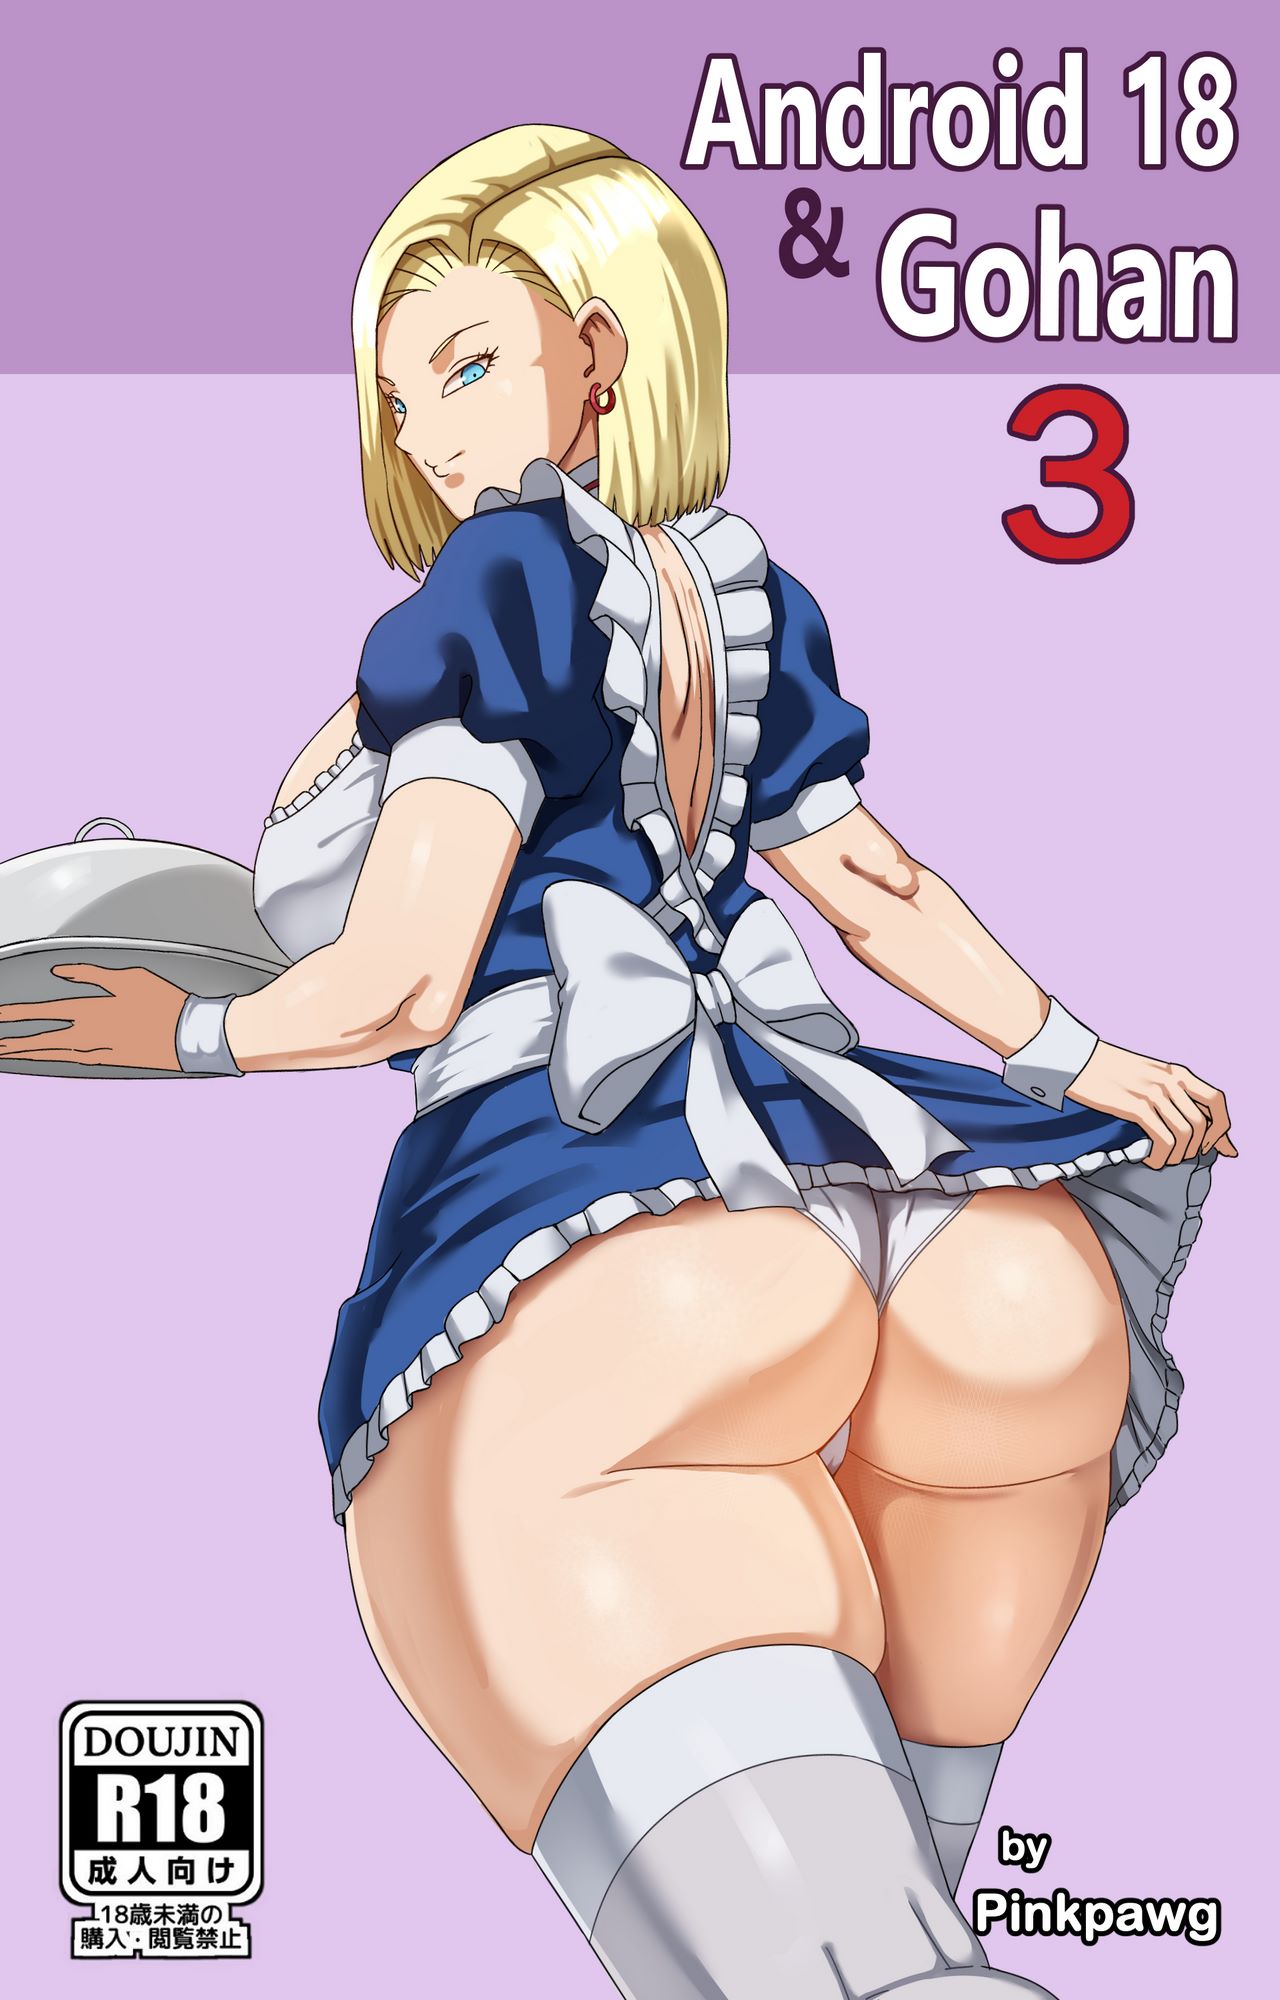 1280px x 2000px - Android 18 & Gohan 3 - Pink Pawg - KingComiX.com